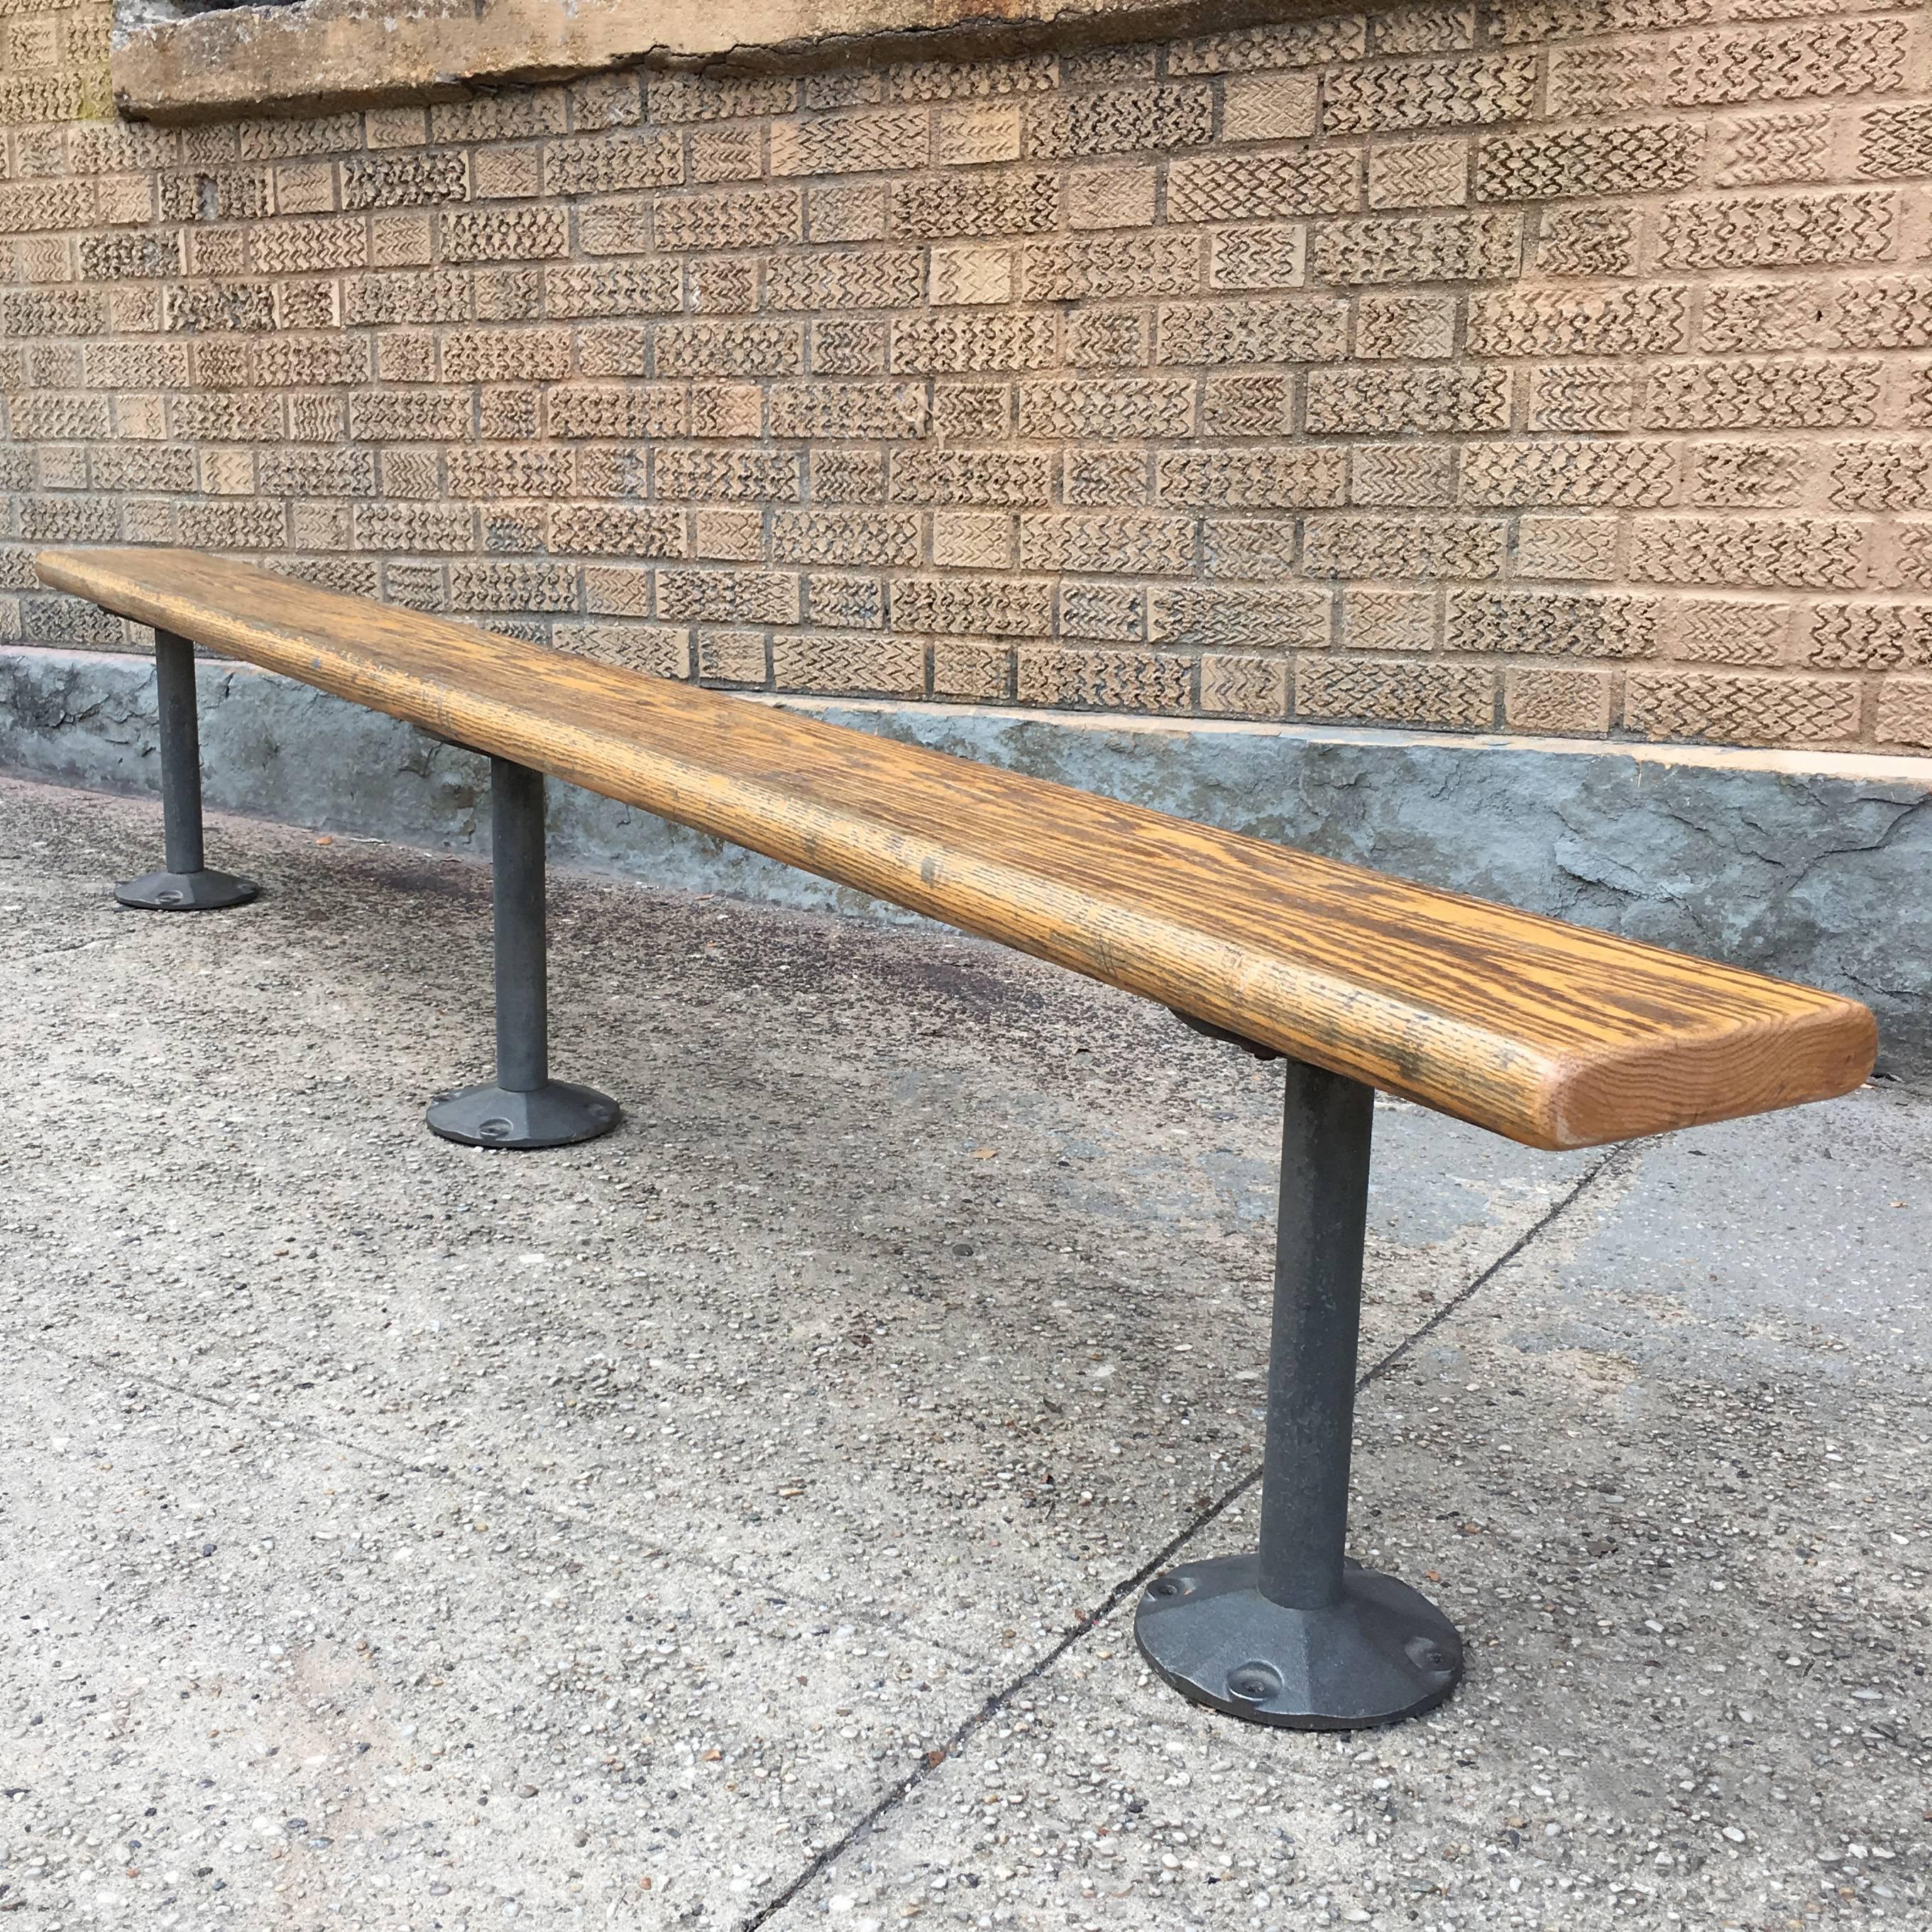 American, gymnasium bench with cast iron legs and oak plank top. It is recommended this bench be secured to the floor for use.